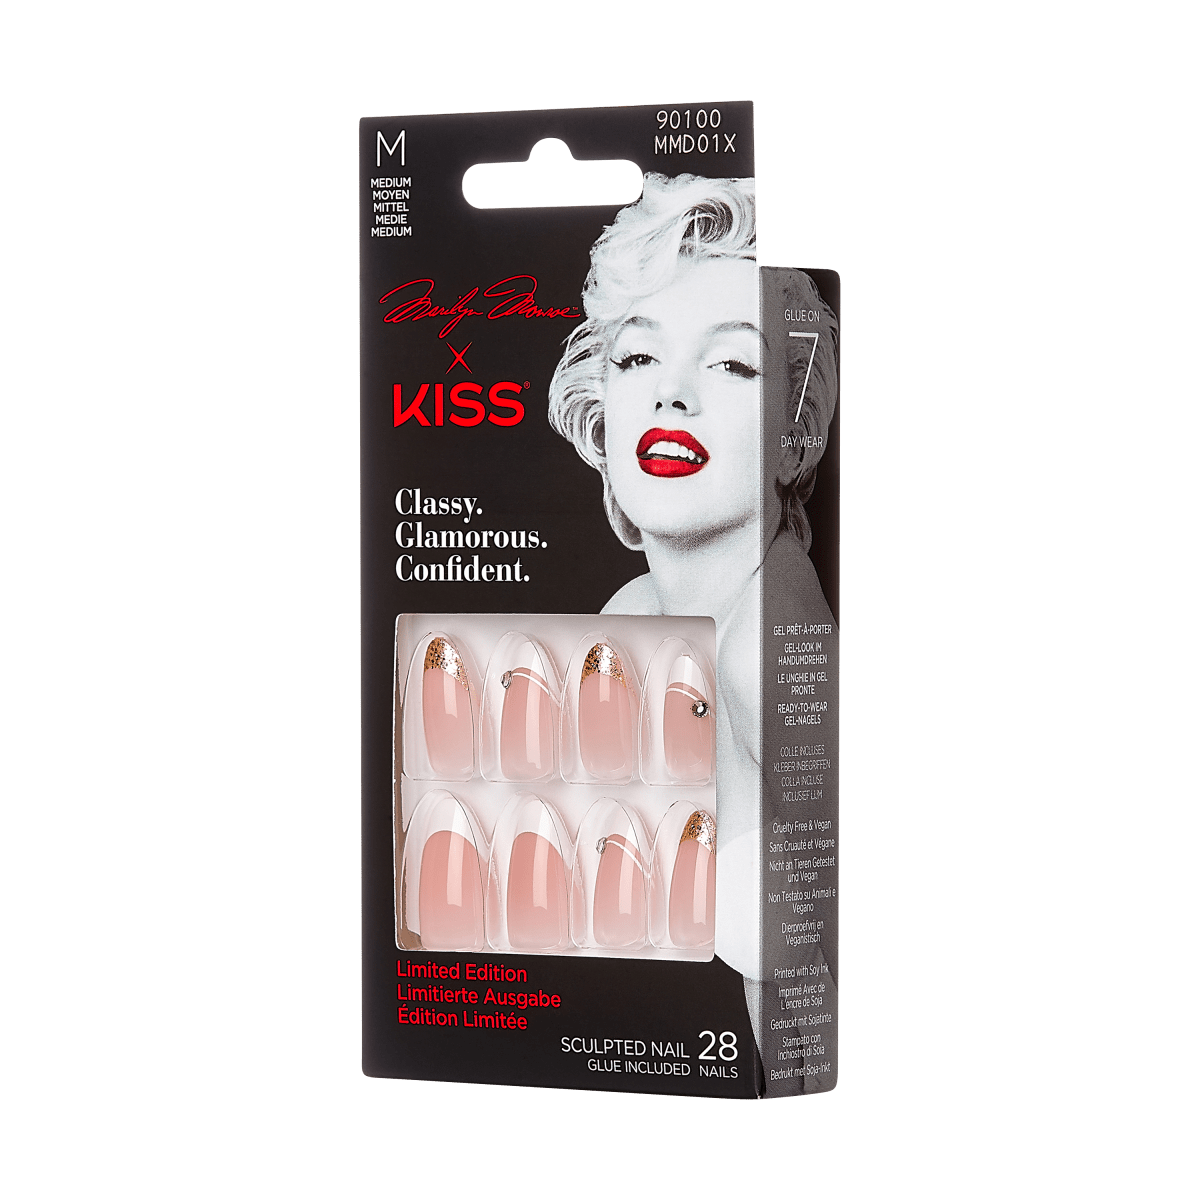 Marilyn Monroe x KISS Limited Edition Nails - Blonde Ambition